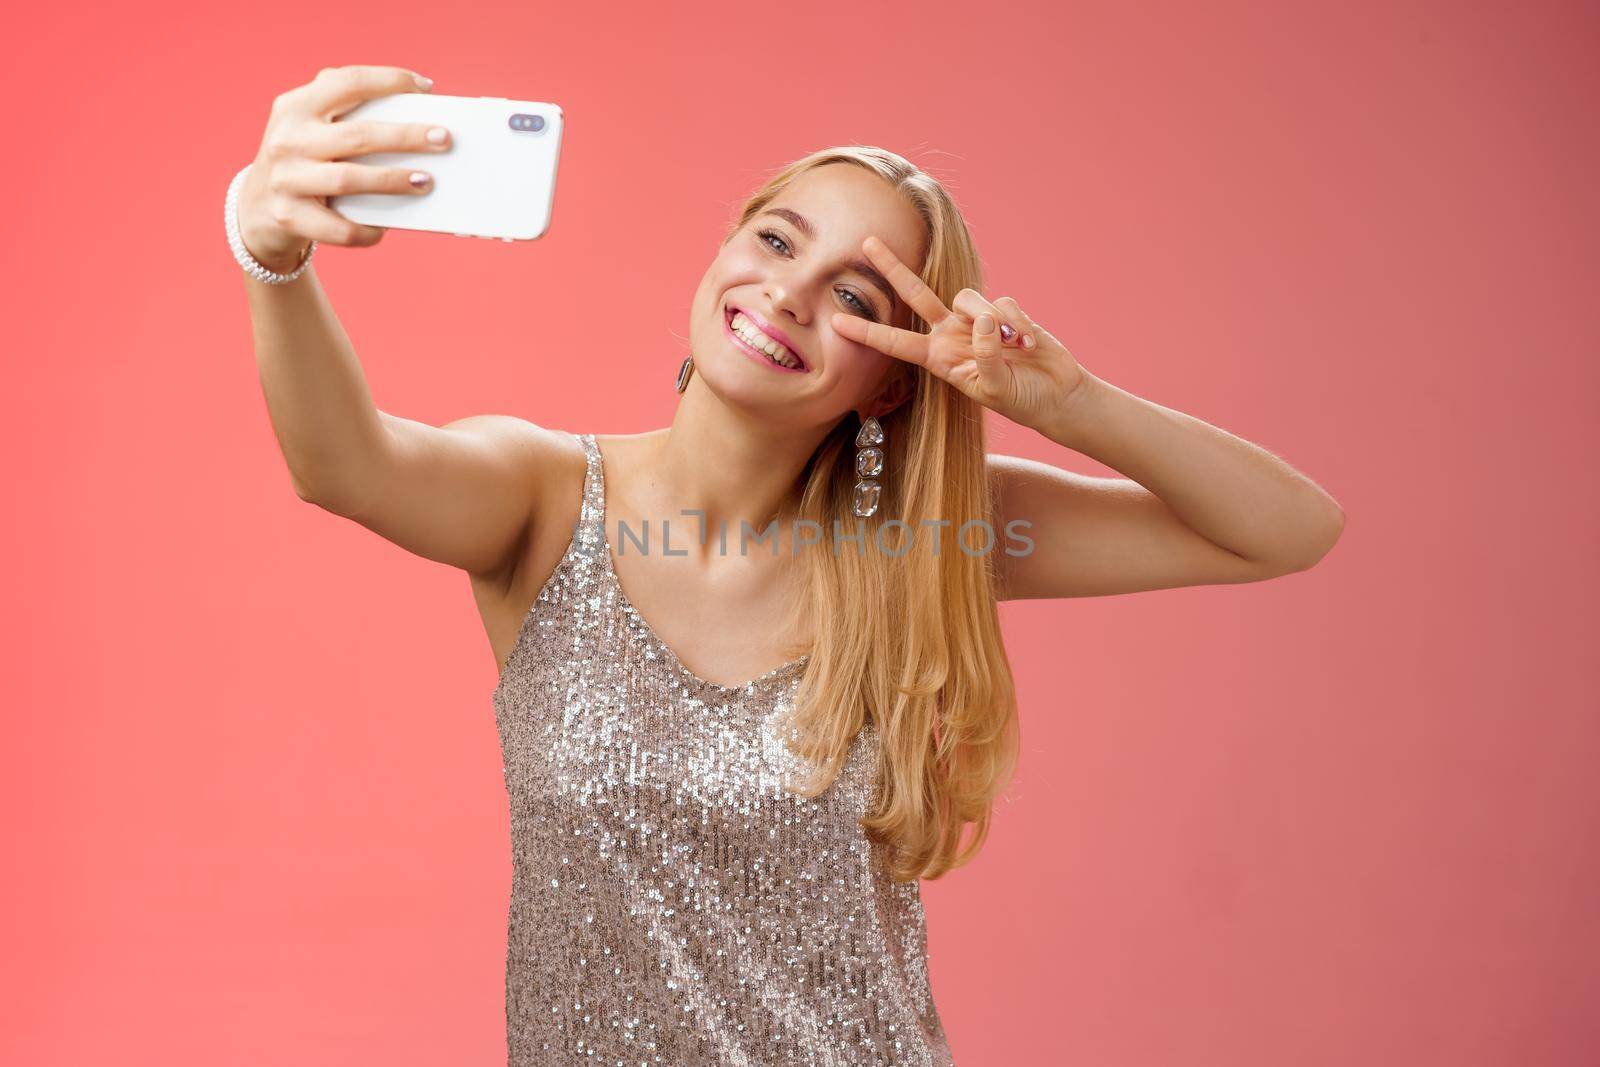 Lifestyle. Stylish fabulous glamour young blond woman in glittering silver dress tilting head carefree show peace gesture victory sign extend arm holding smartphone taking selfie recording video post online.